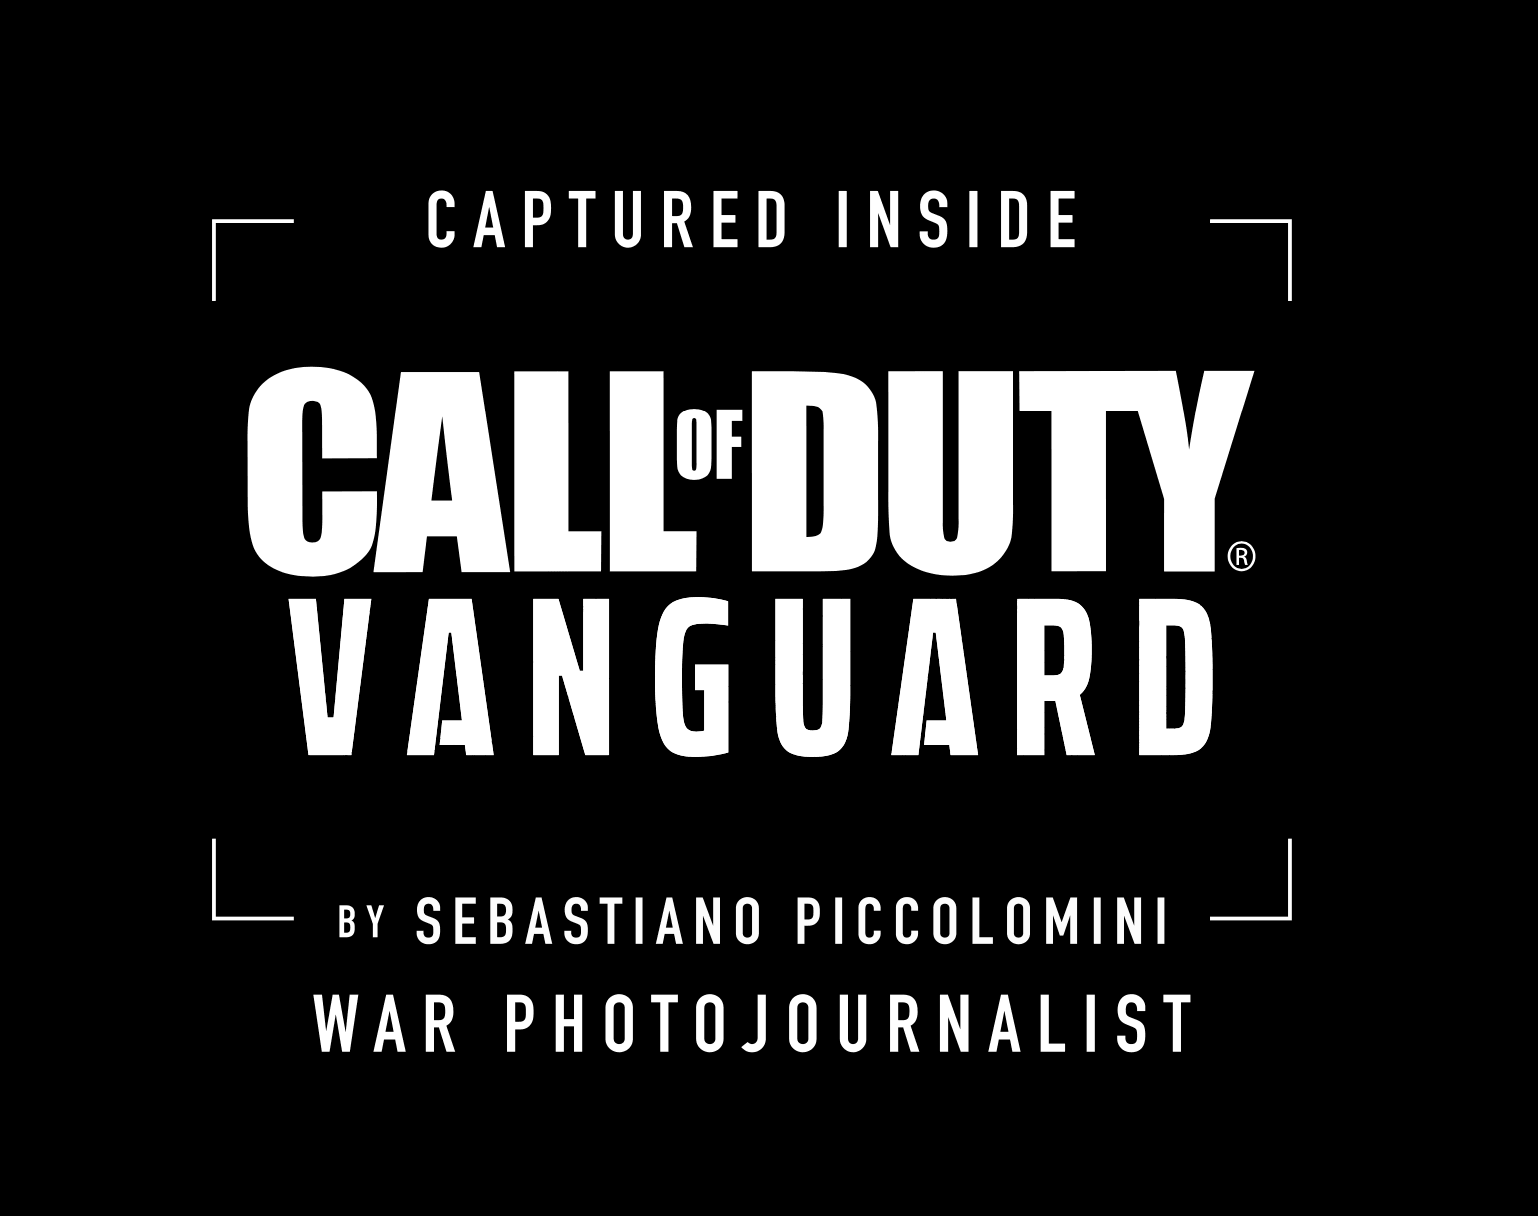 Call of Duty Vanguards of Photography - Battle in Berlin by Sebastiano Tomada Piccolomini 30 x 15 print - Limited to 25 prints - BLEECKER TRADING